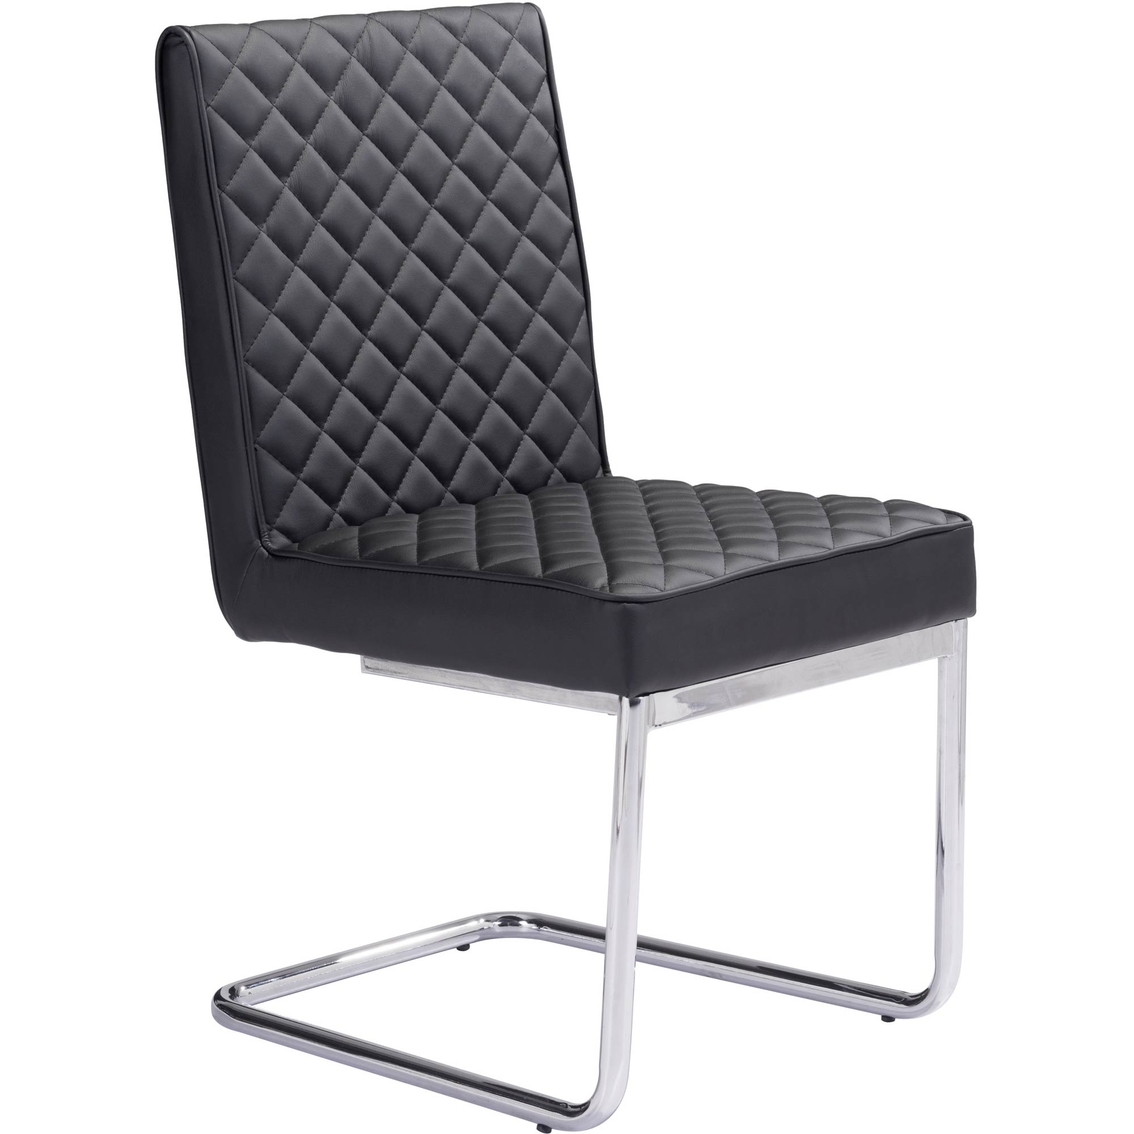 Zuo Modern Quilt Armless Dining Chair Black 2 Pk. - Image 3 of 4